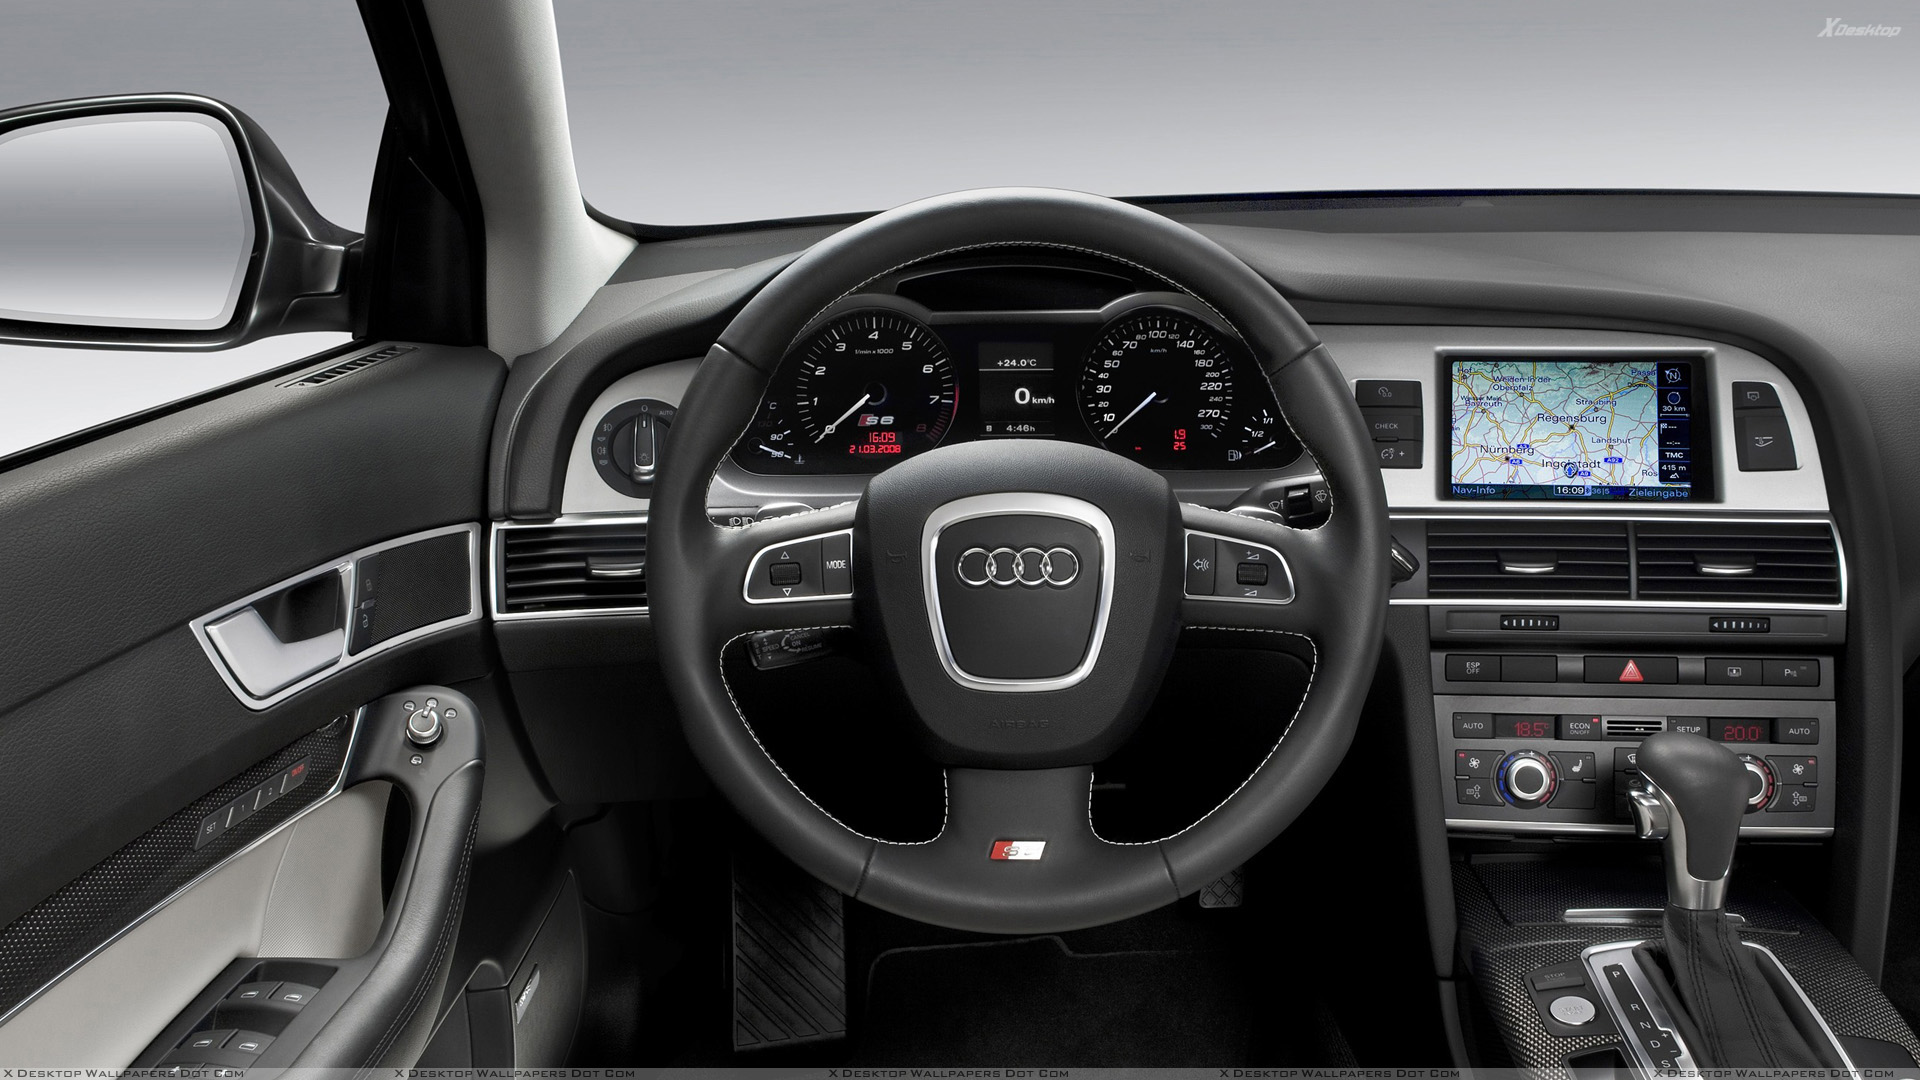 You Are Viewing Wallpaper - Audi S6 2009 Interior , HD Wallpaper & Backgrounds